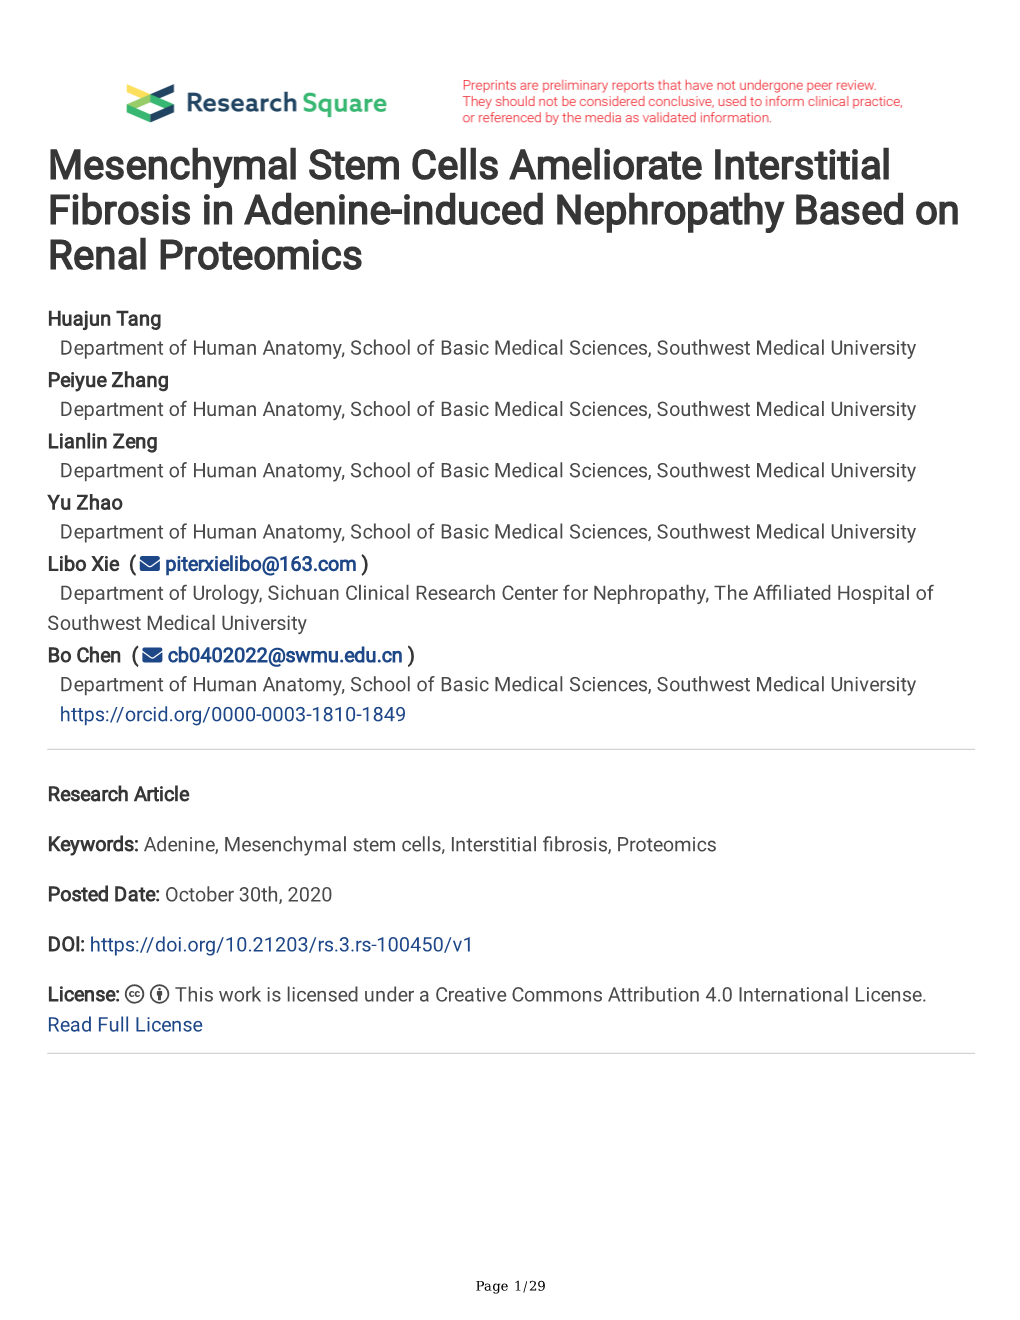 Mesenchymal Stem Cells Ameliorate Interstitial Fibrosis in Adenine-Induced Nephropathy Based on Renal Proteomics